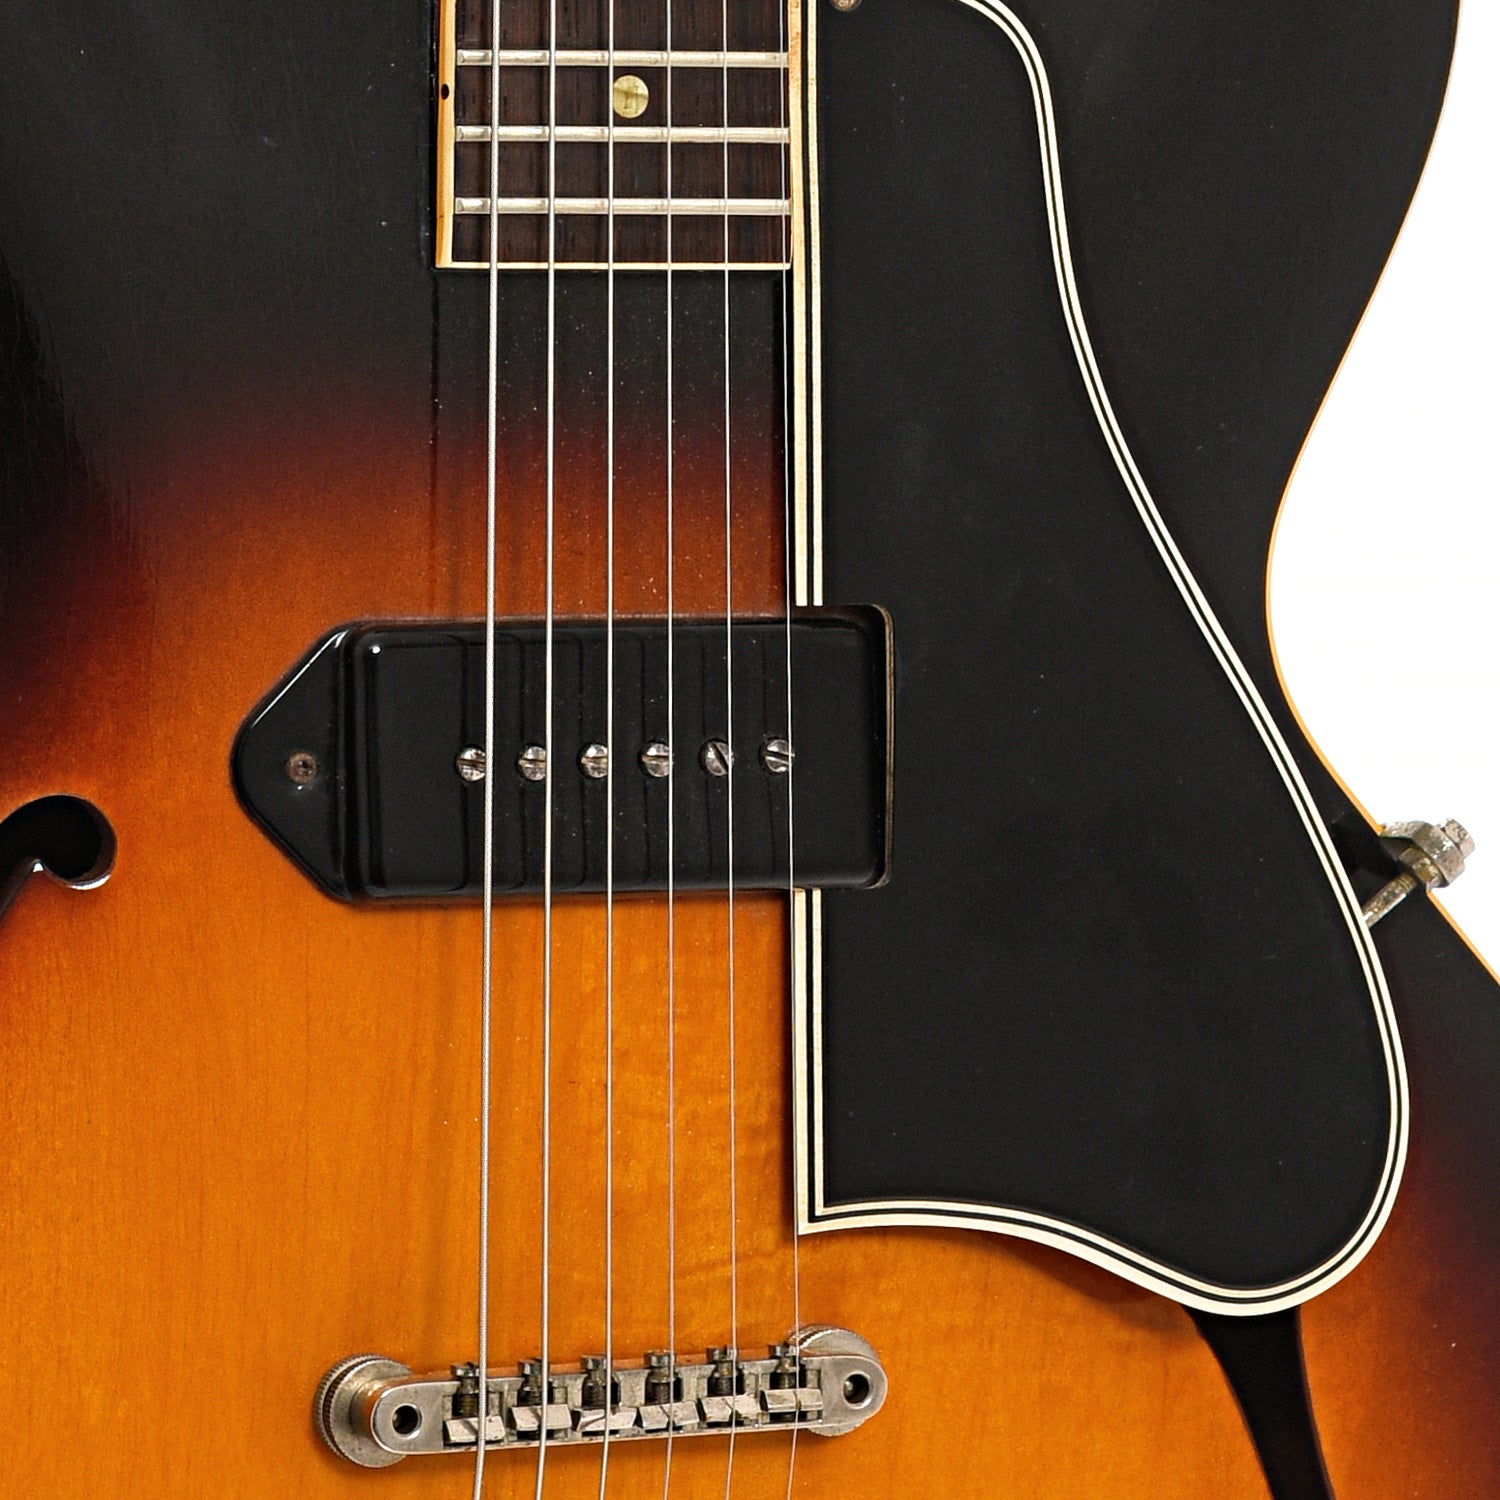 Pickup and pickguard of Gibson ES-330T Hollow Body